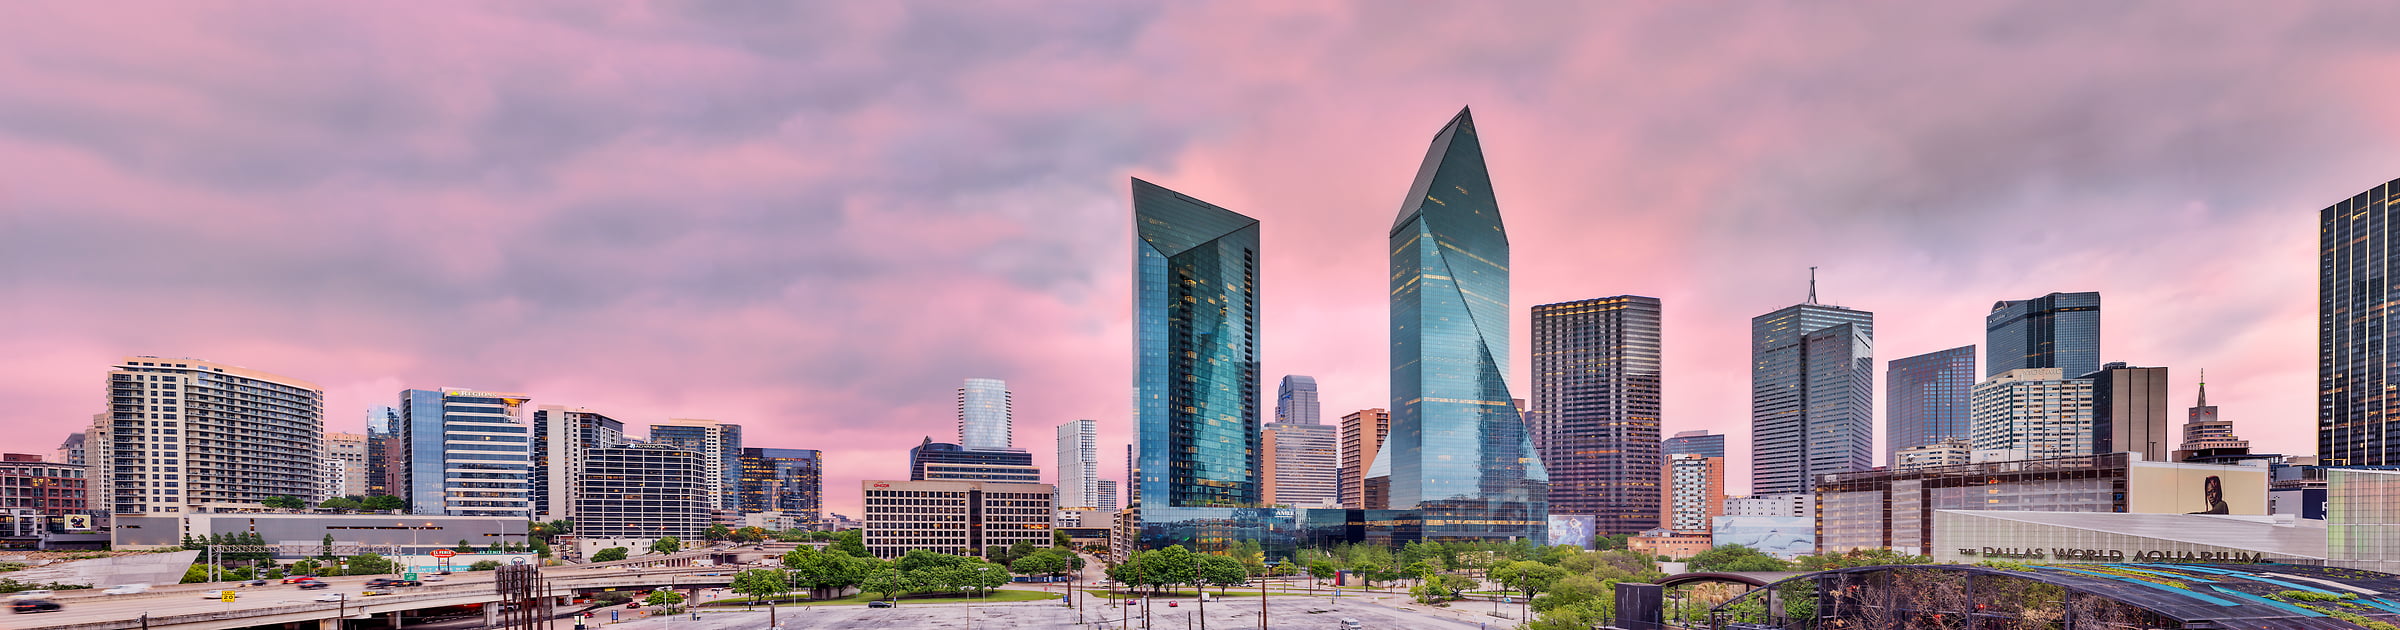 3,107 megapixels! A very high resolution, large-format VAST photo print of the Dallas skyline at sunset; cityscape photograph created by Chris Blake in Dallas, TX